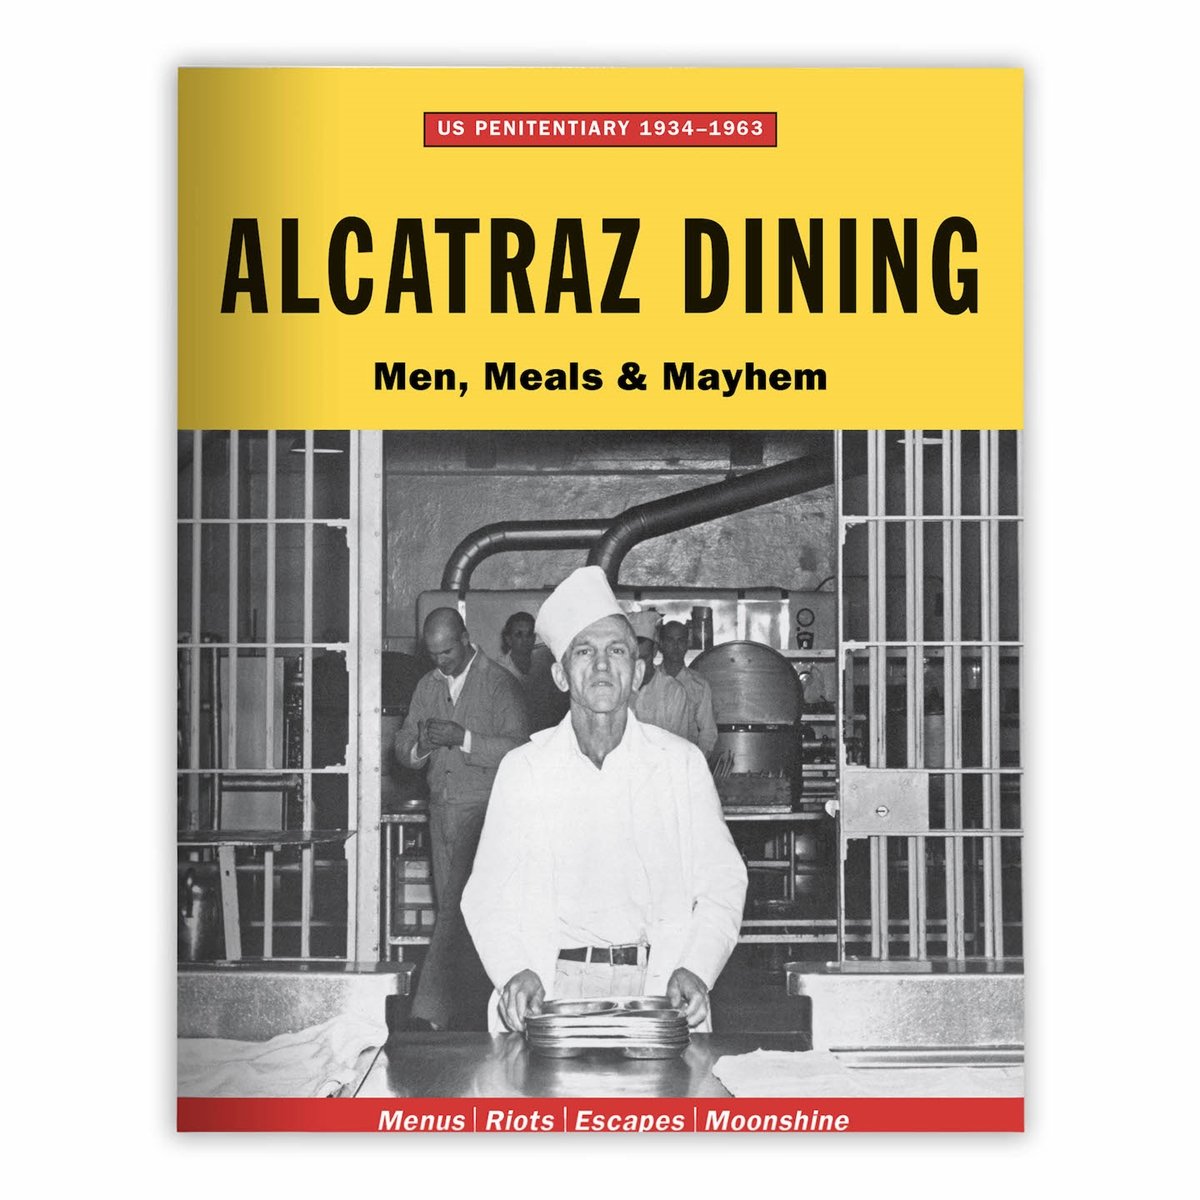 Alcatraz Dining: Men Meals & Mayhem magazine, featuring historical facts and photos of the Rock.